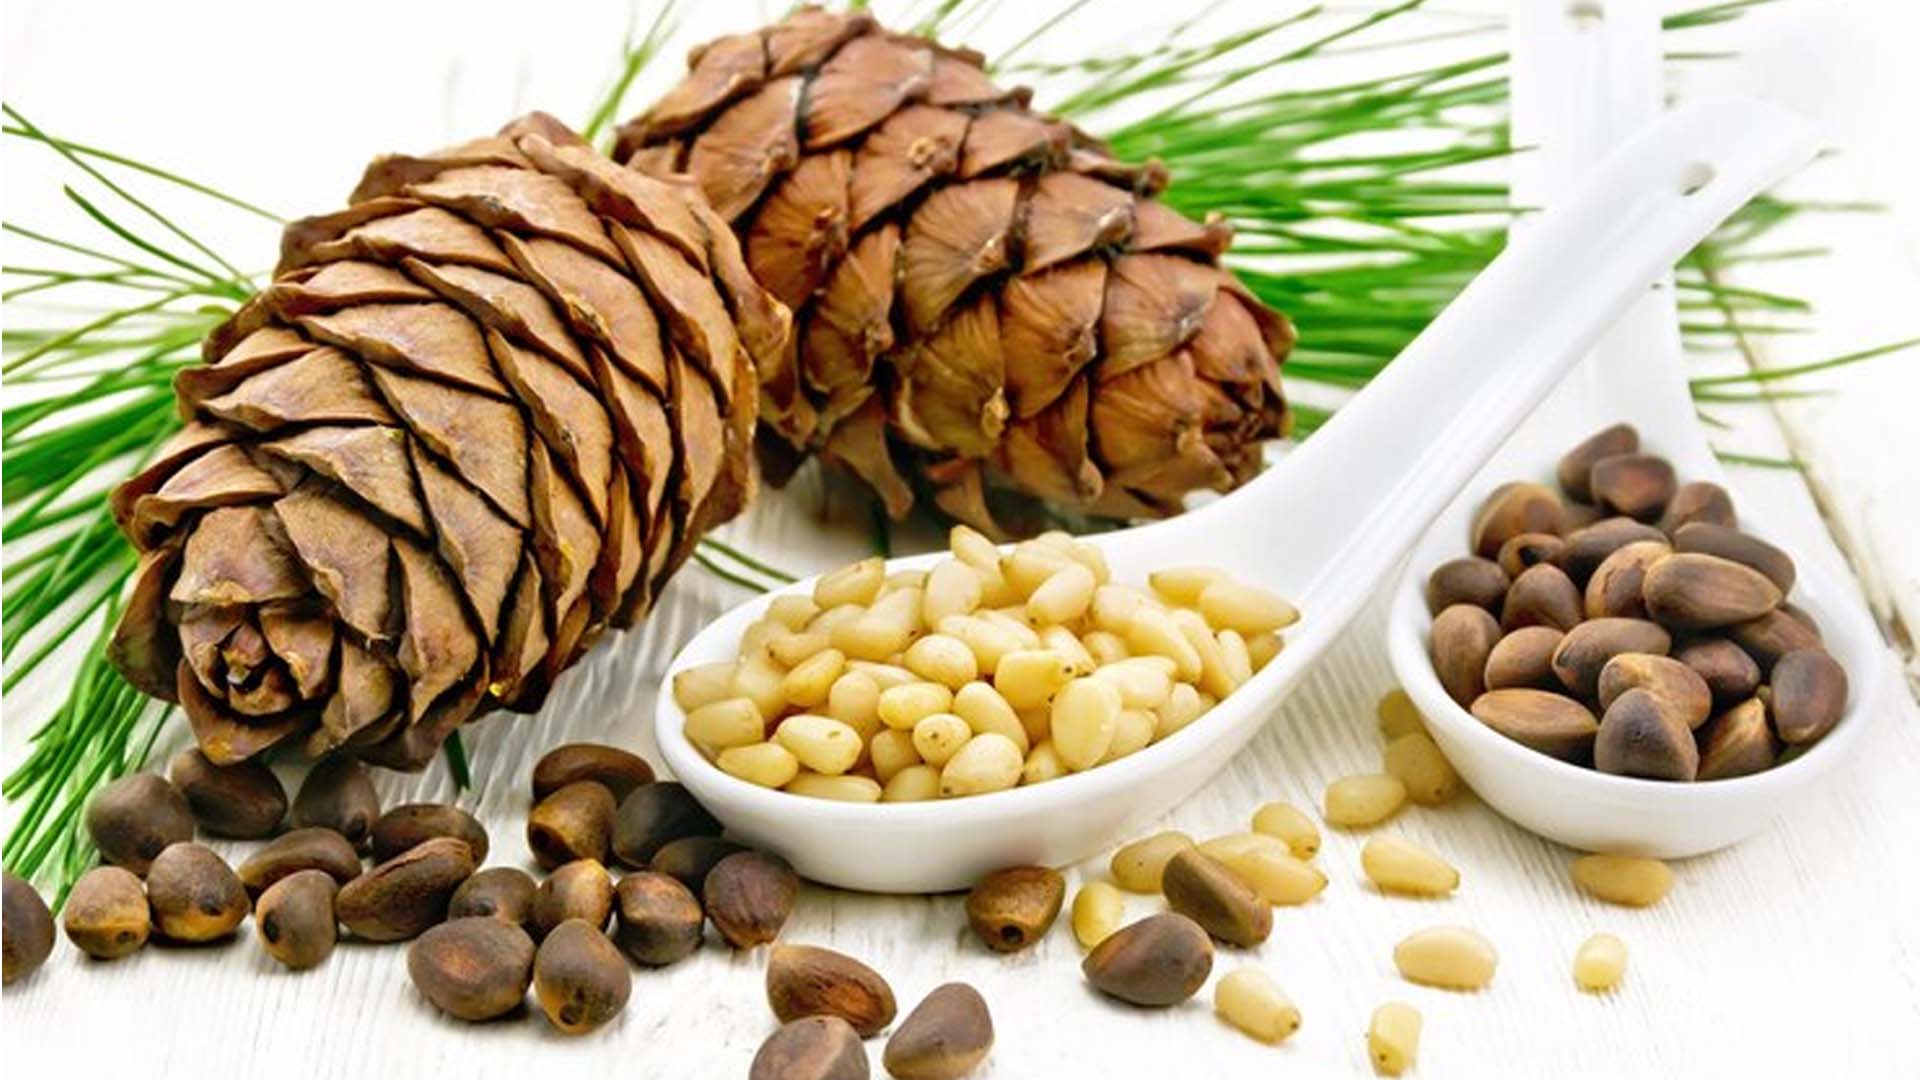 Health Benefits and Nutrition of Pine nuts